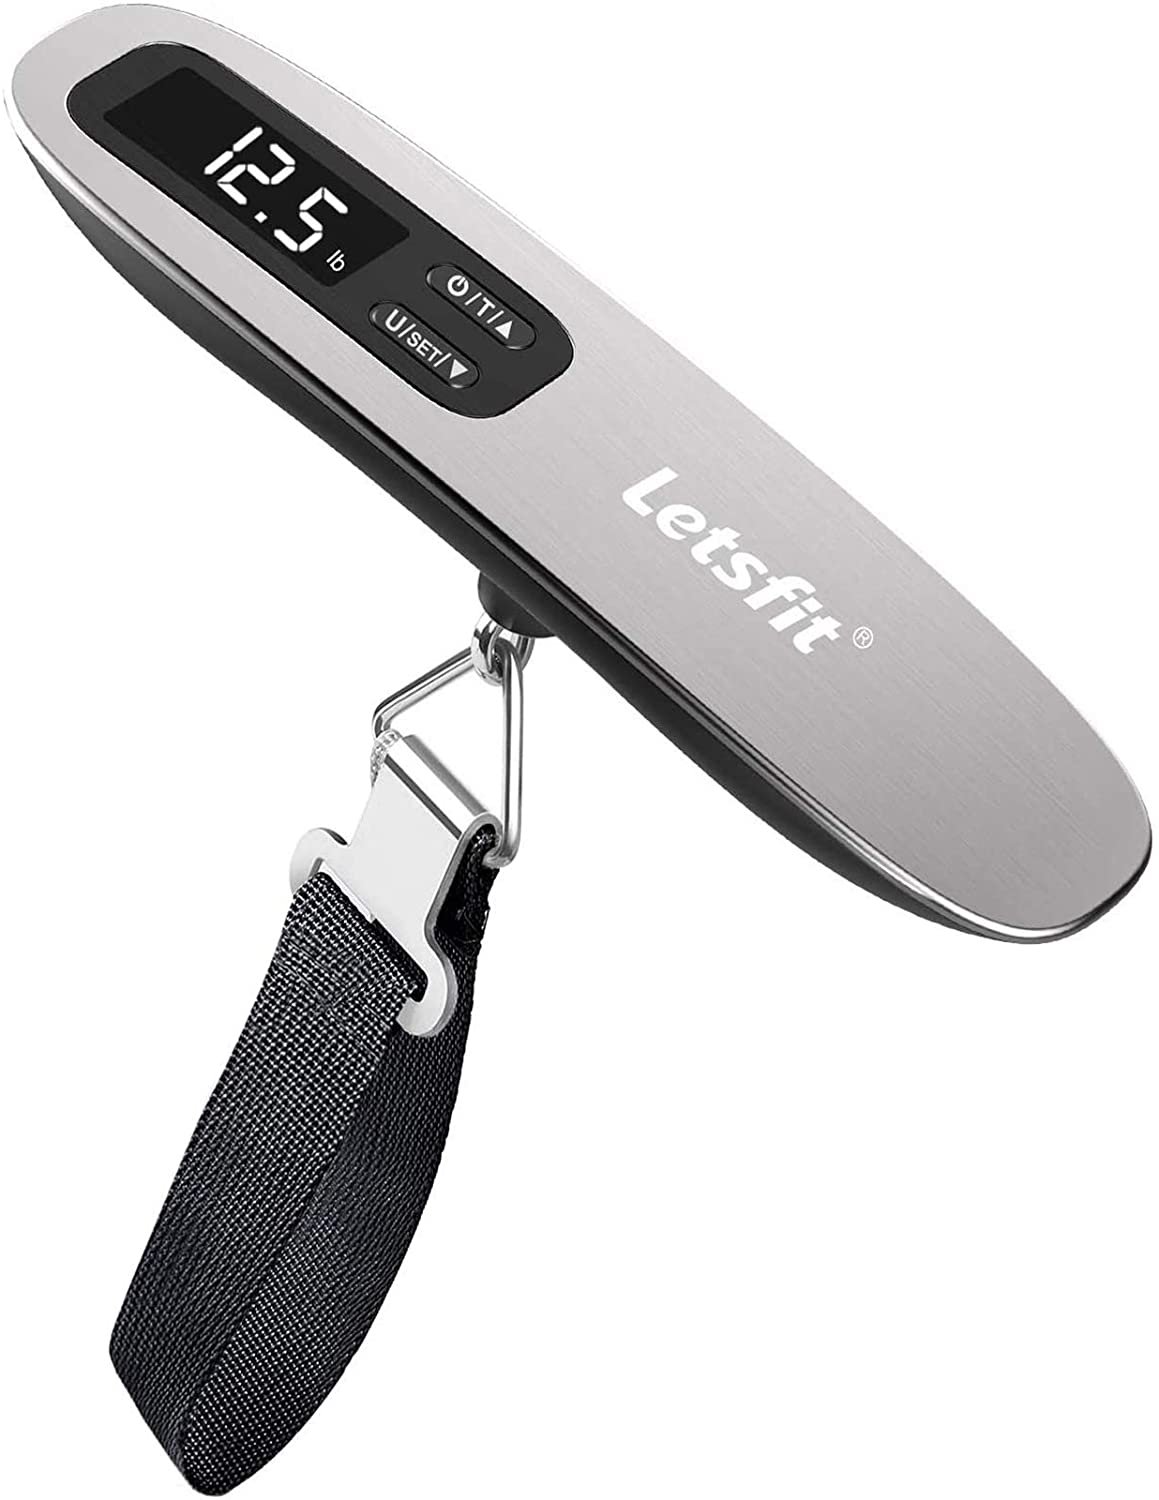 Luggage Scale, best gifts for travelers